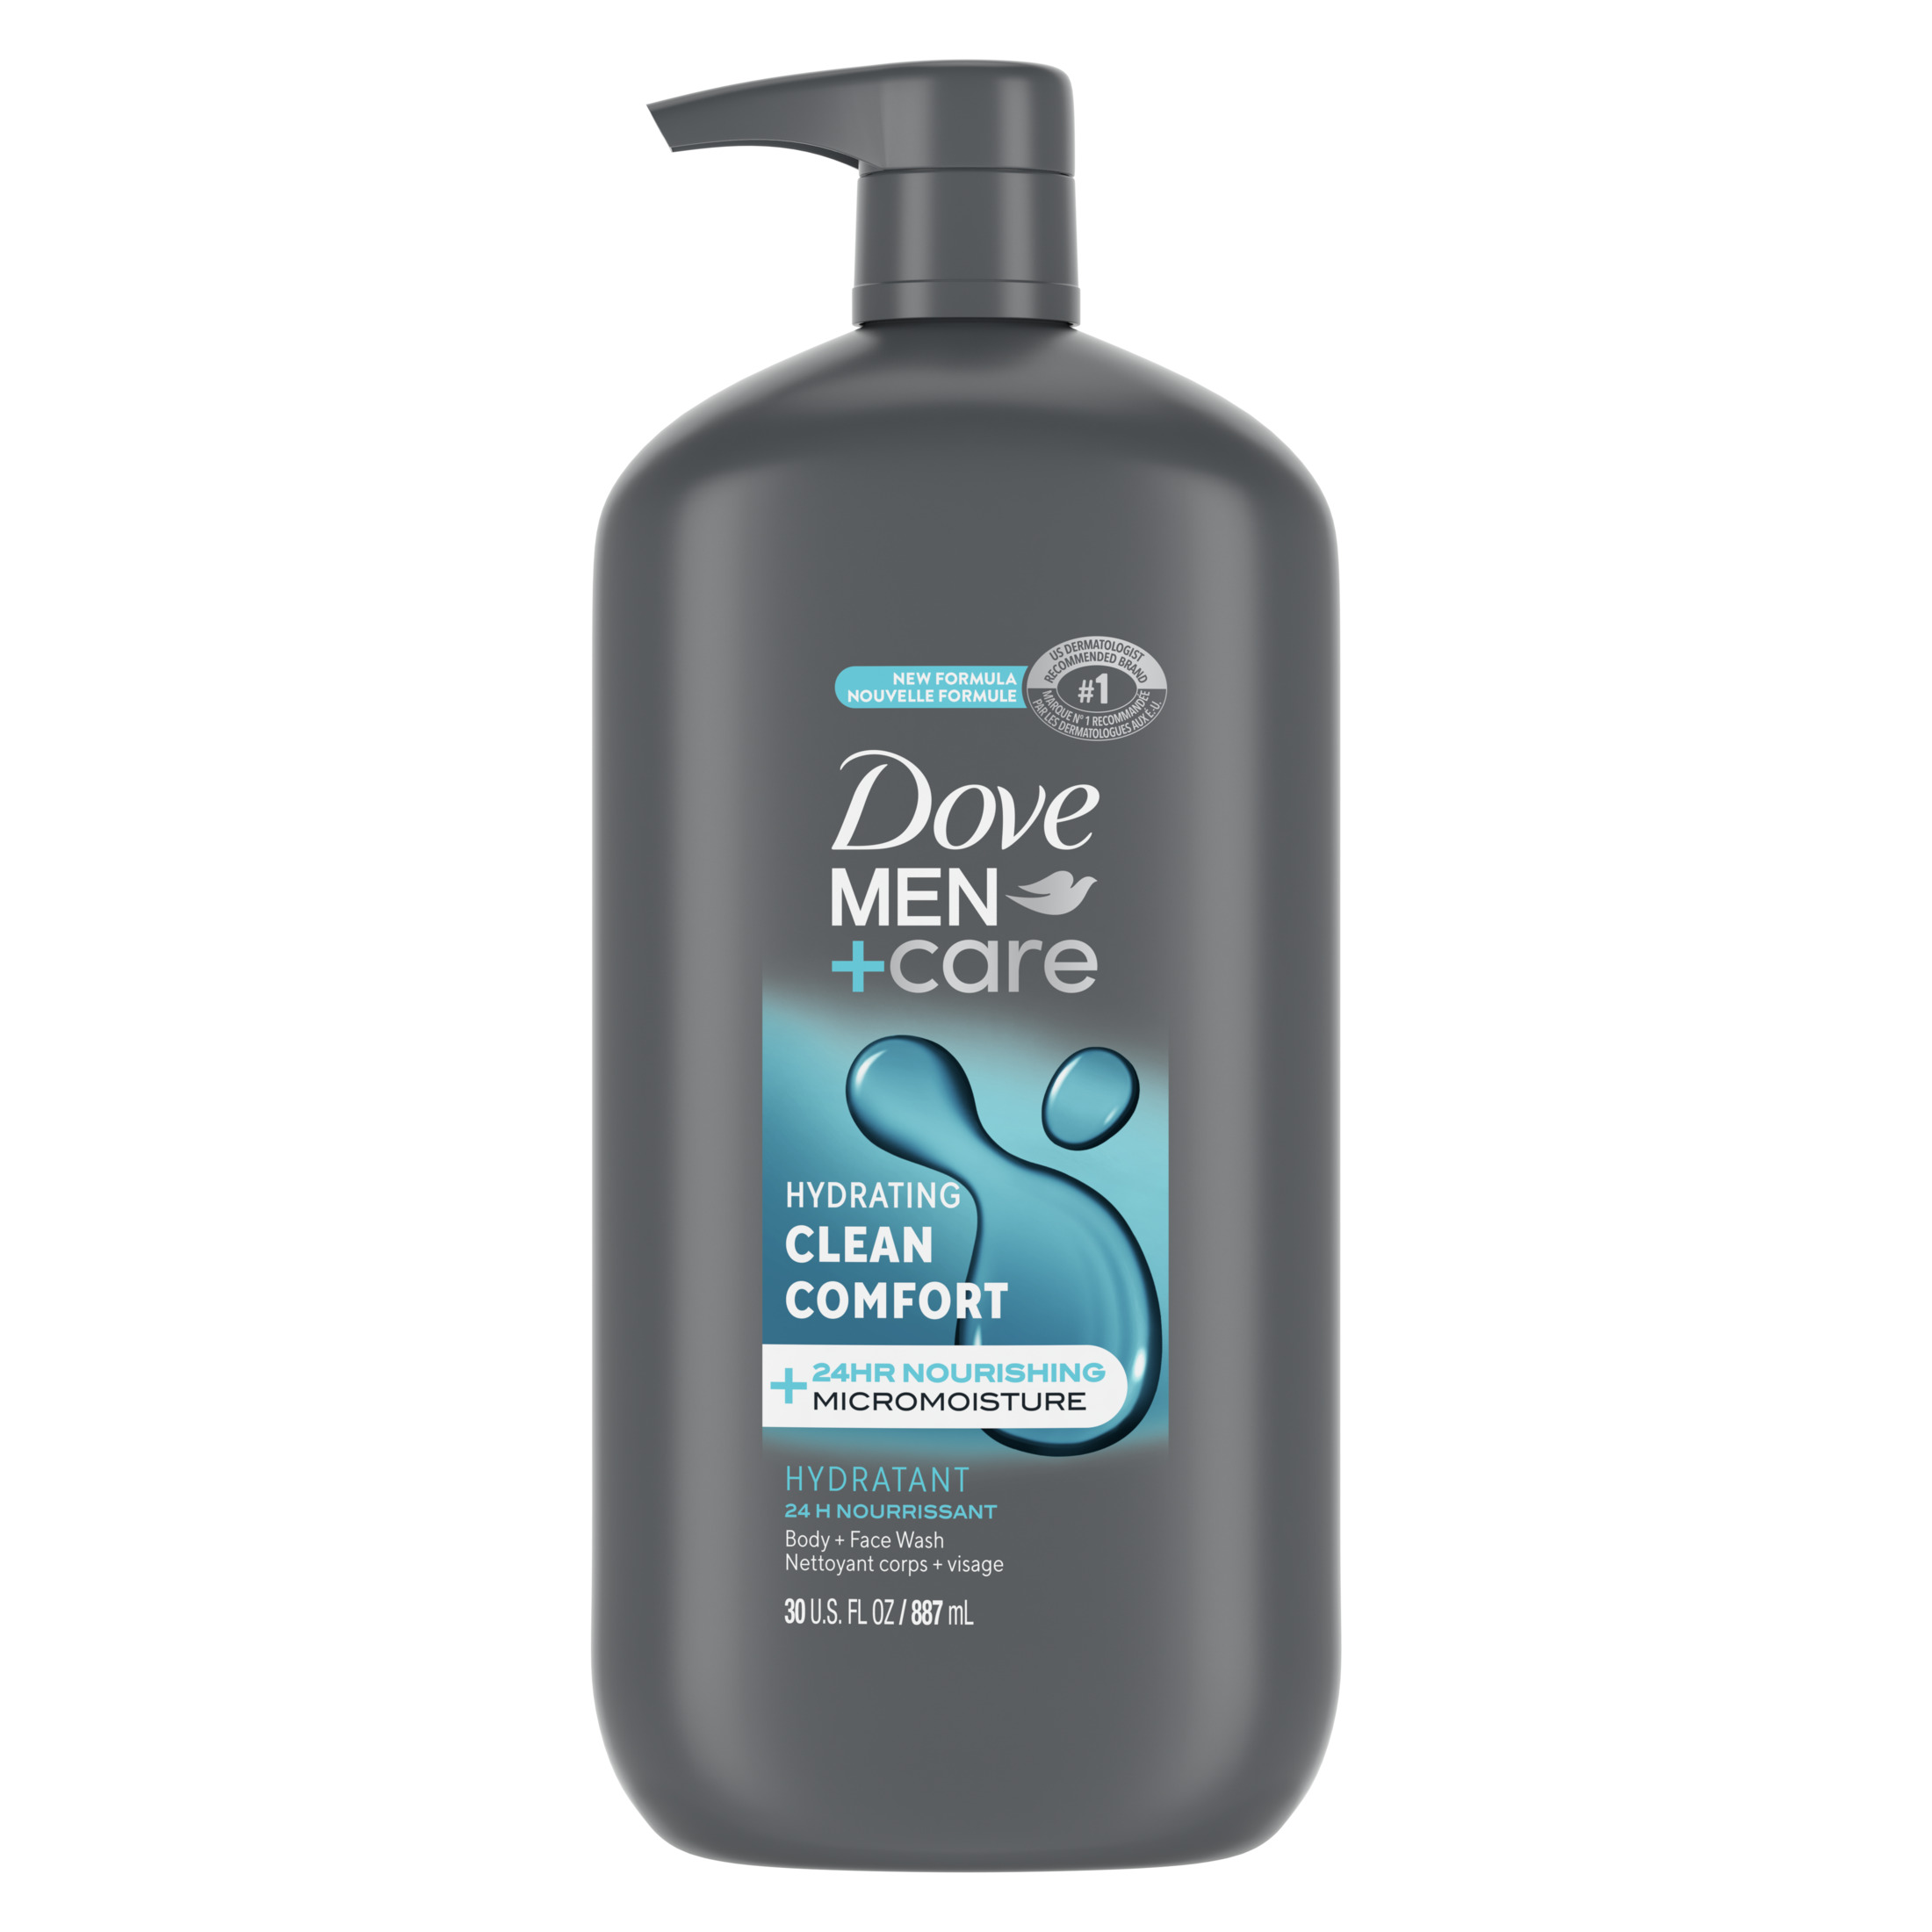 Dove Men+Care Clean Comfort Hydrating Face and Body Wash, 30 fl oz - image 1 of 14